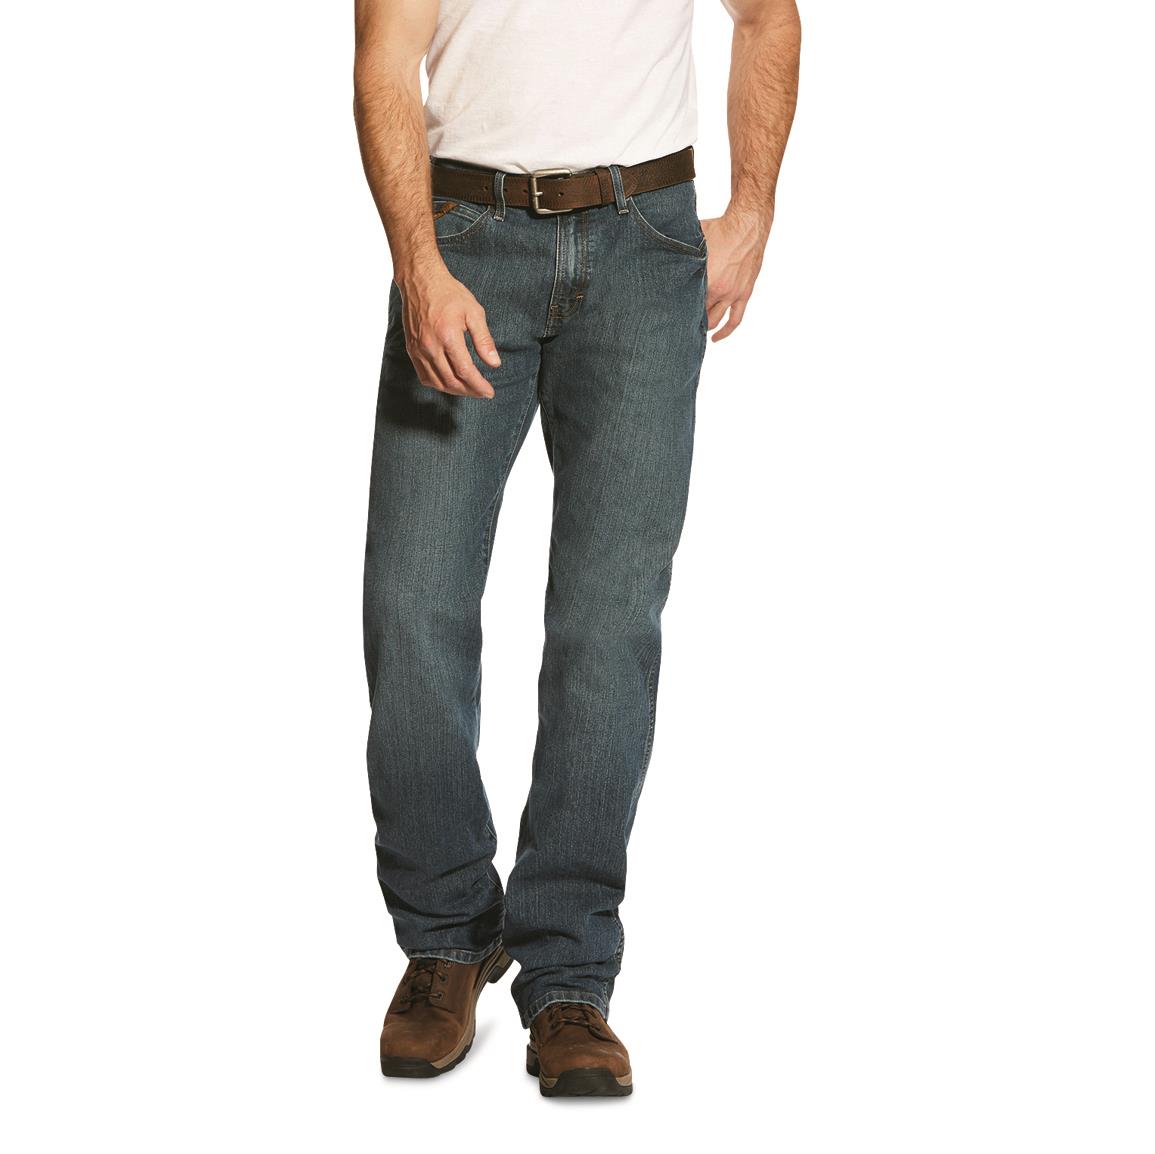 Ariat Men's Rebar M4 Relaxed Durastretch Bootcut Jeans, Carbine